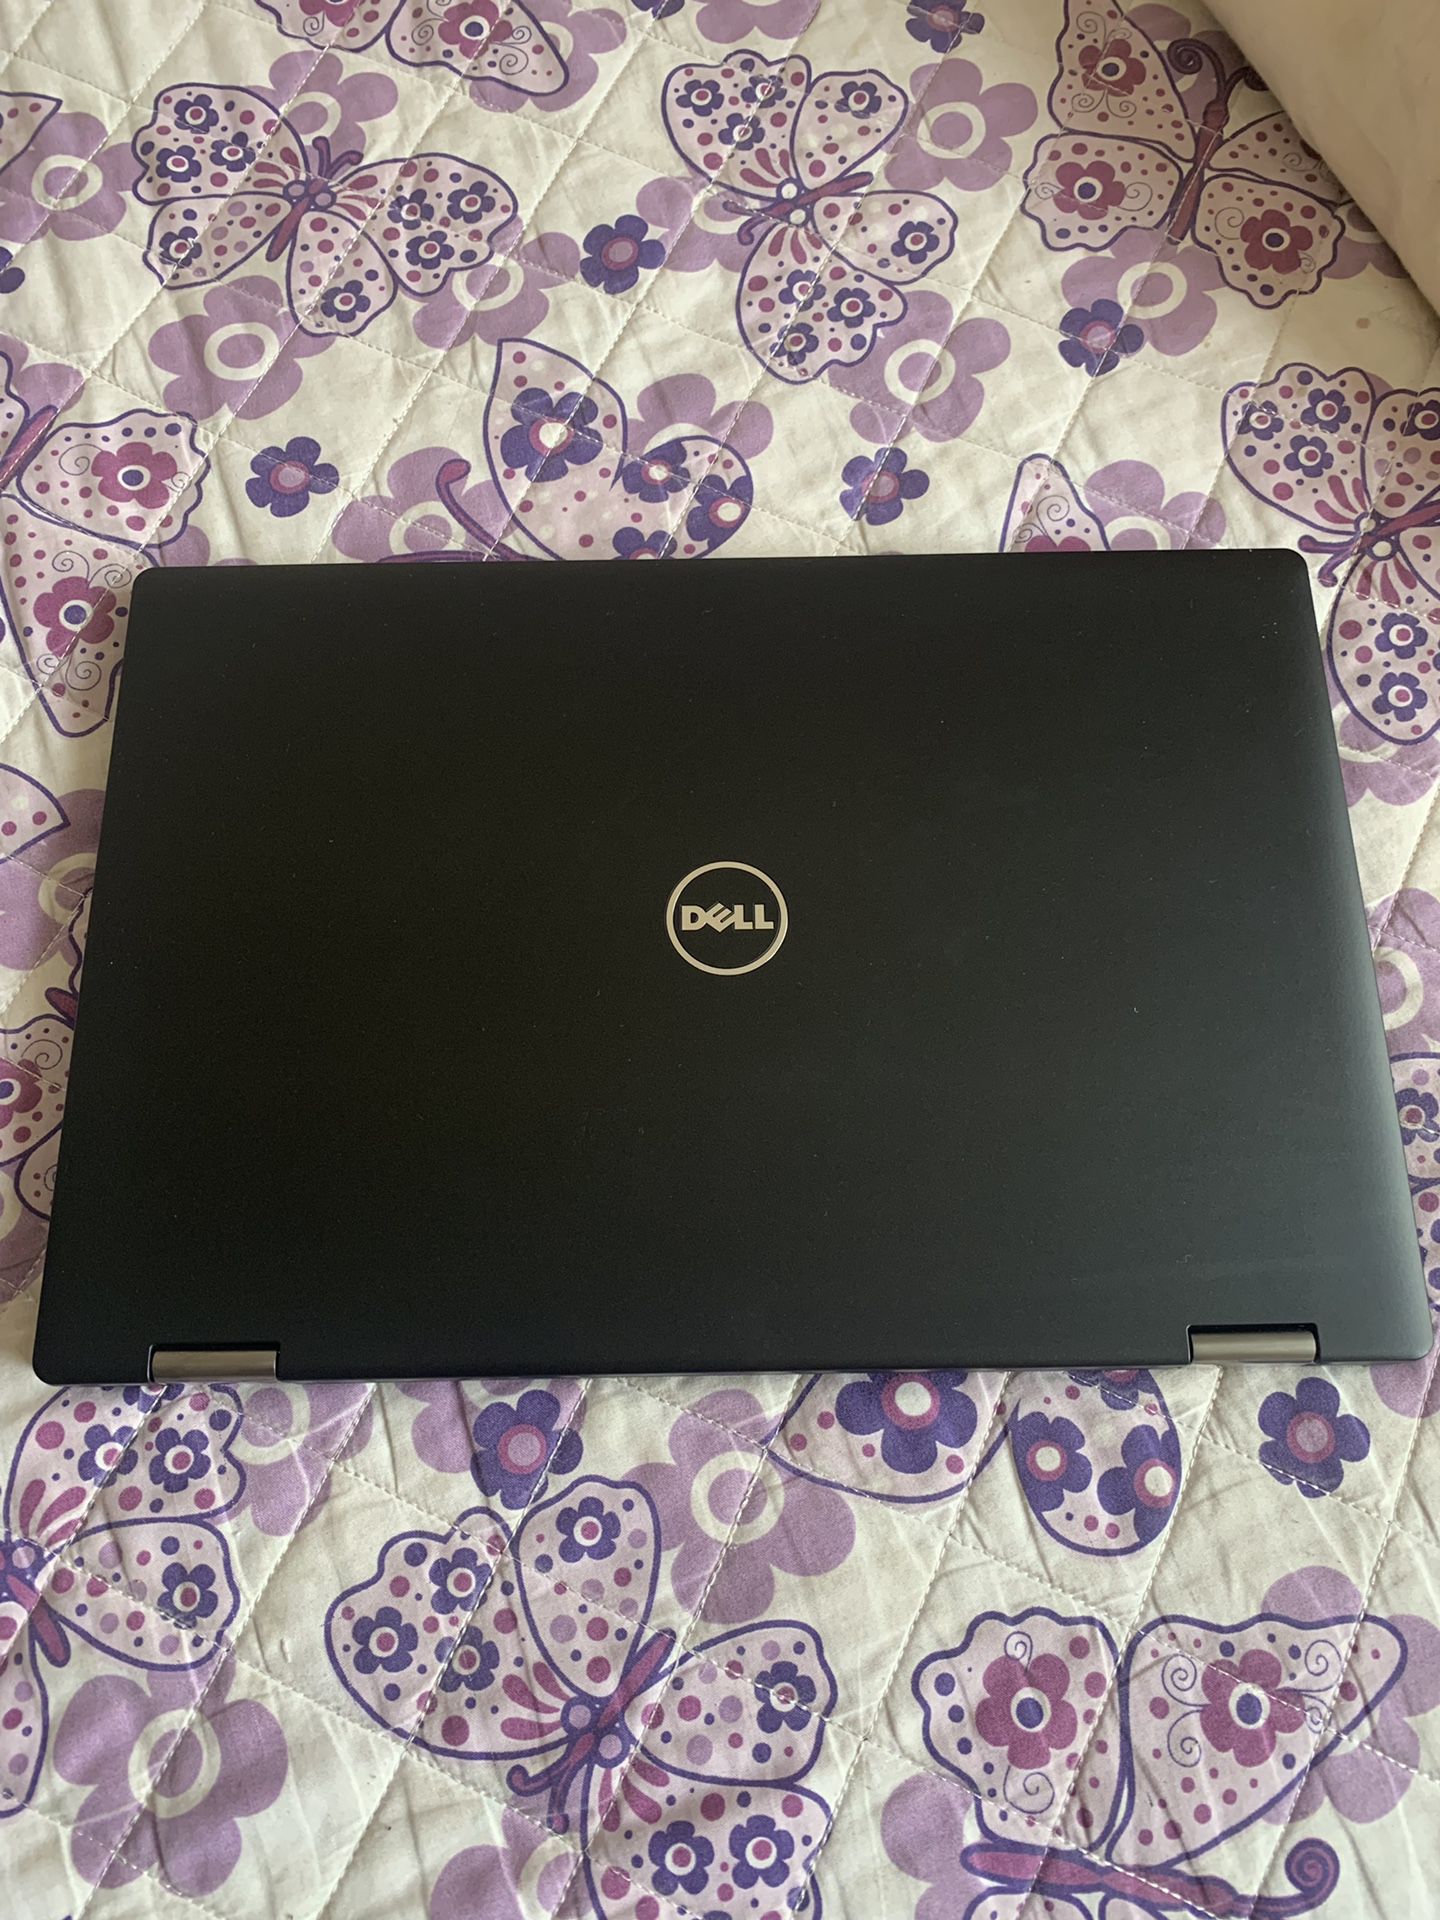 13” Dell laptop (touchscreen) Like new $500obo